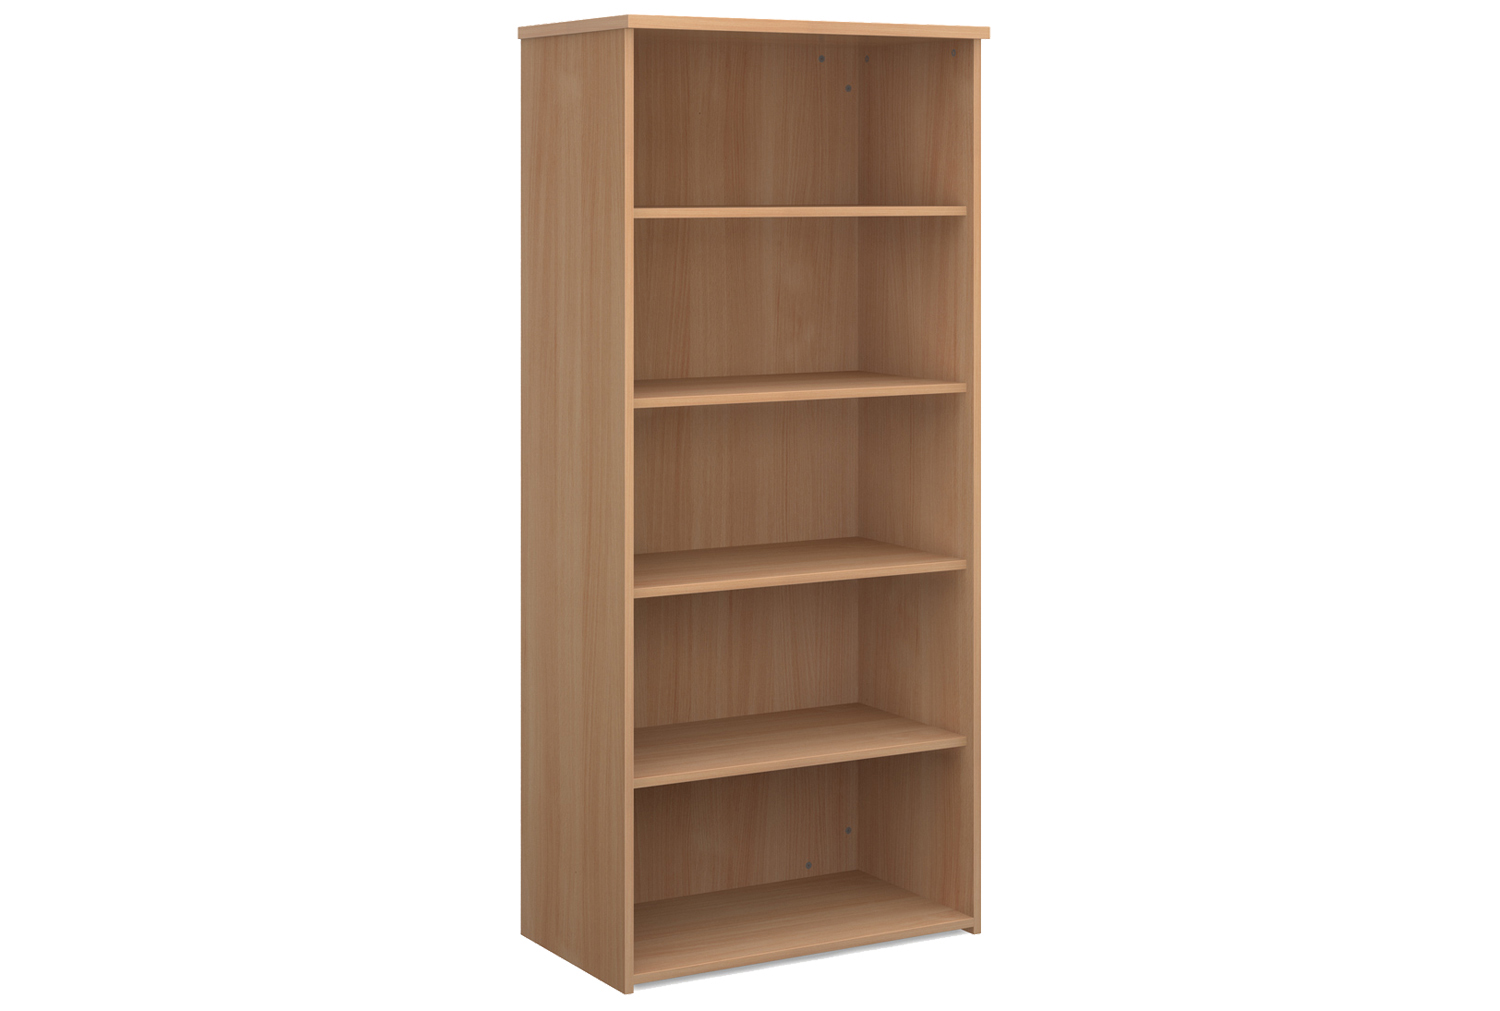 Value Line Office Bookcases, 4 Shelf - 80wx47dx179h (cm), Beech, Fully Installed